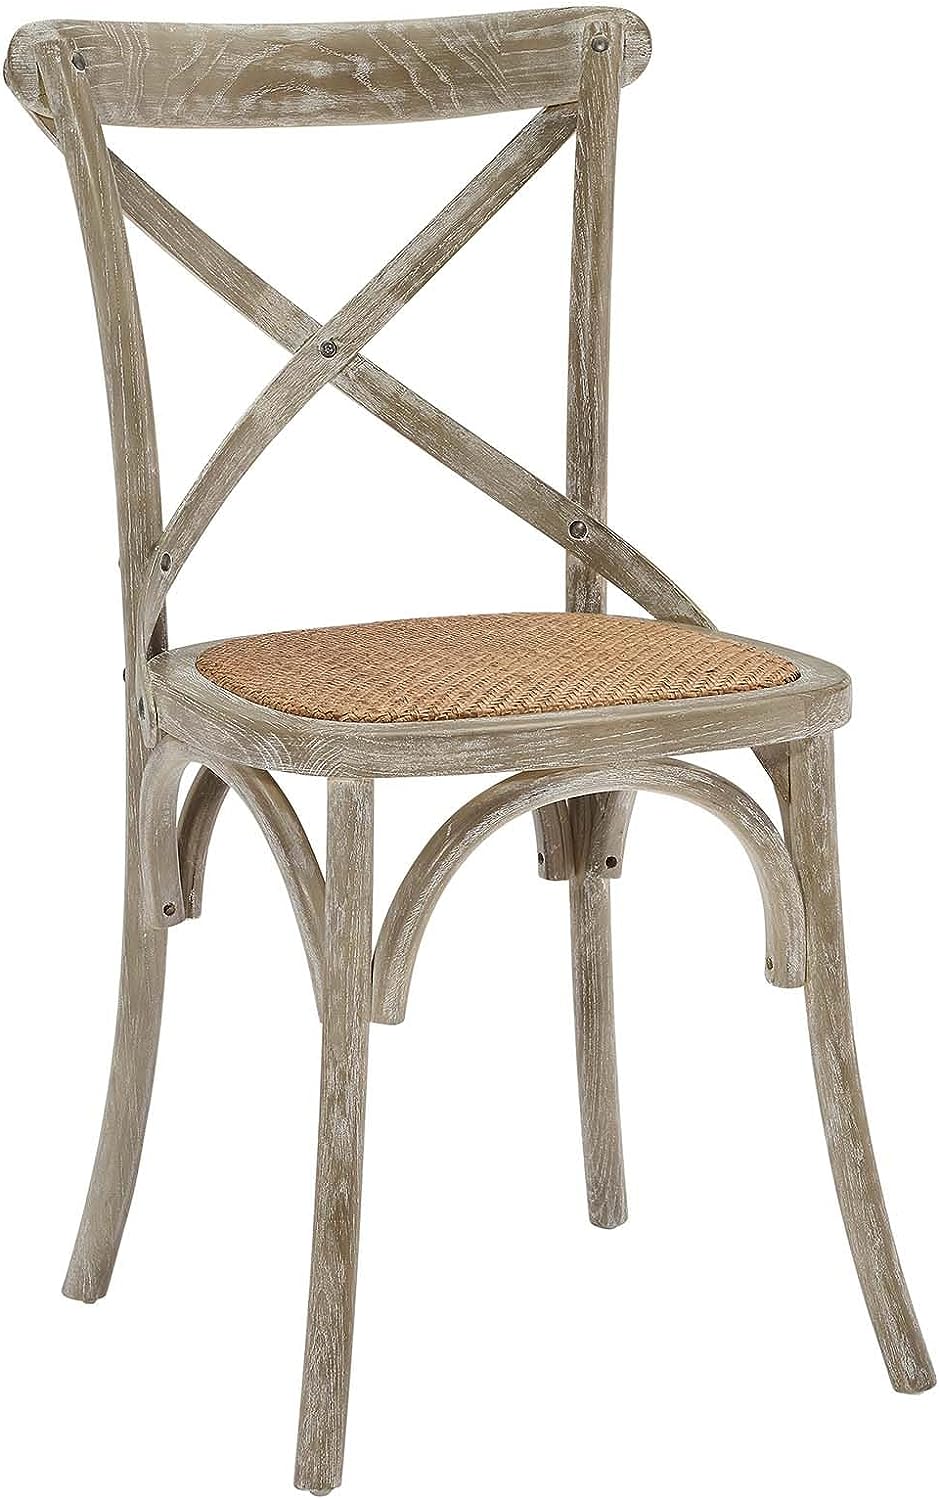 GRAY RATTAN CROSS BACK DINING CHAIRS